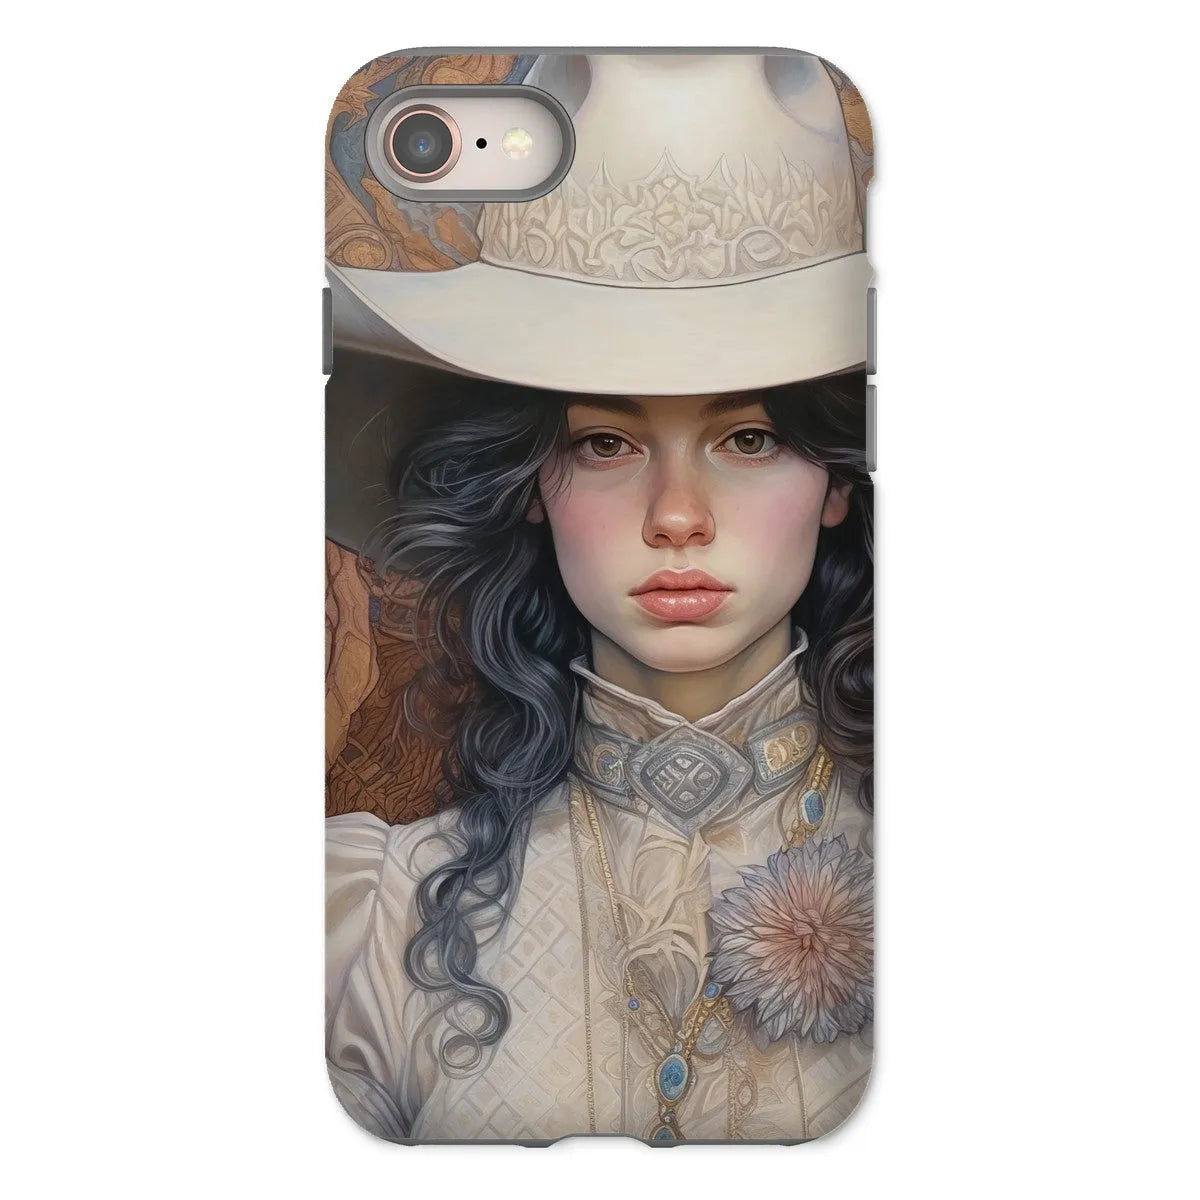 Helena The Lesbian Cowgirl - Sapphic Art Phone Case - Iphone 8 / Matte - Mobile Phone Cases - Aesthetic Art